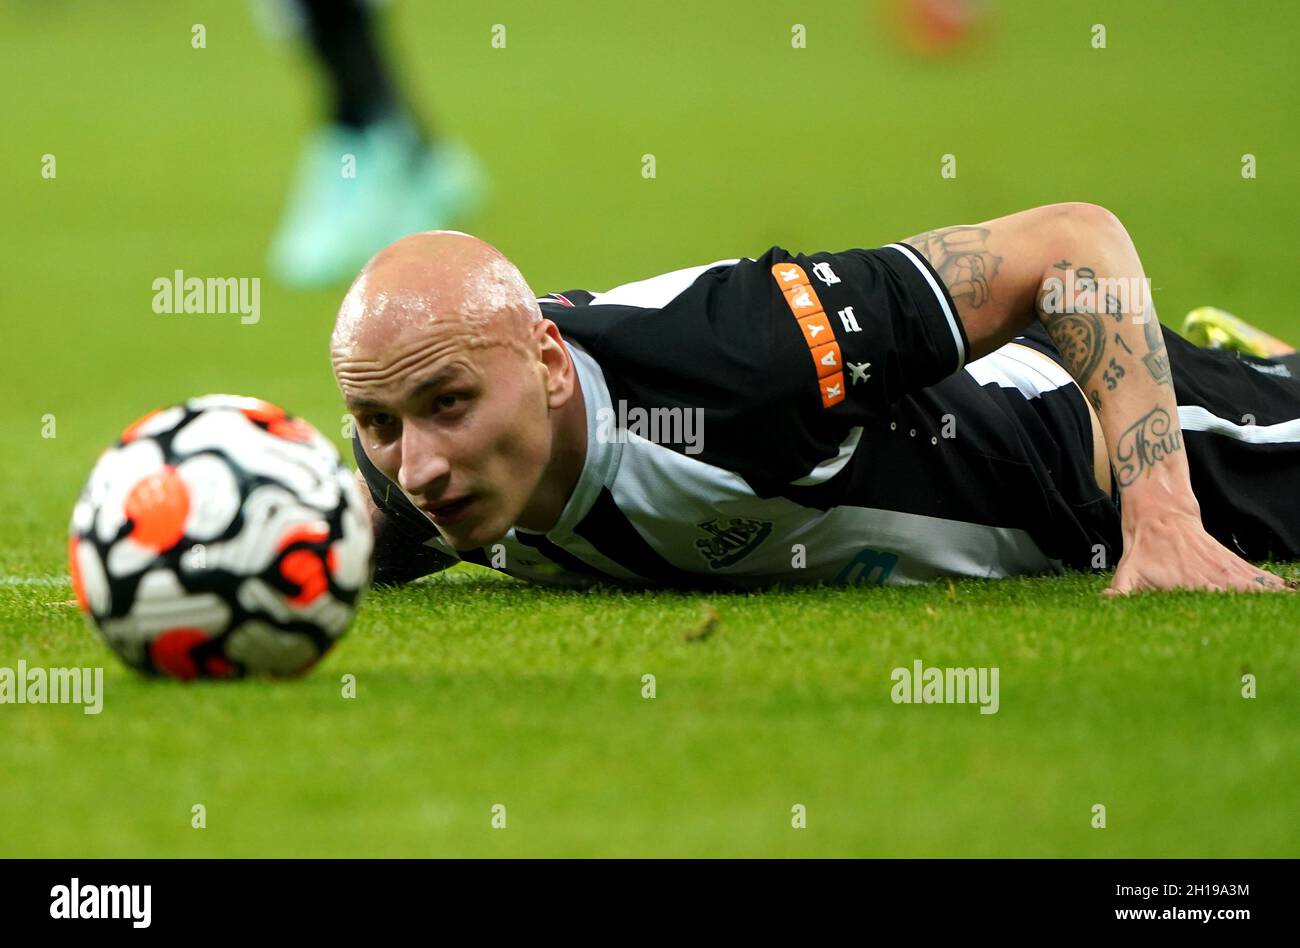 Newcastle United's Jonjo Shelvey after a foul on Hotspur's Sergio Reguilon which received a second yellow card and red card during the Premier match at James' Park, Newcastle.